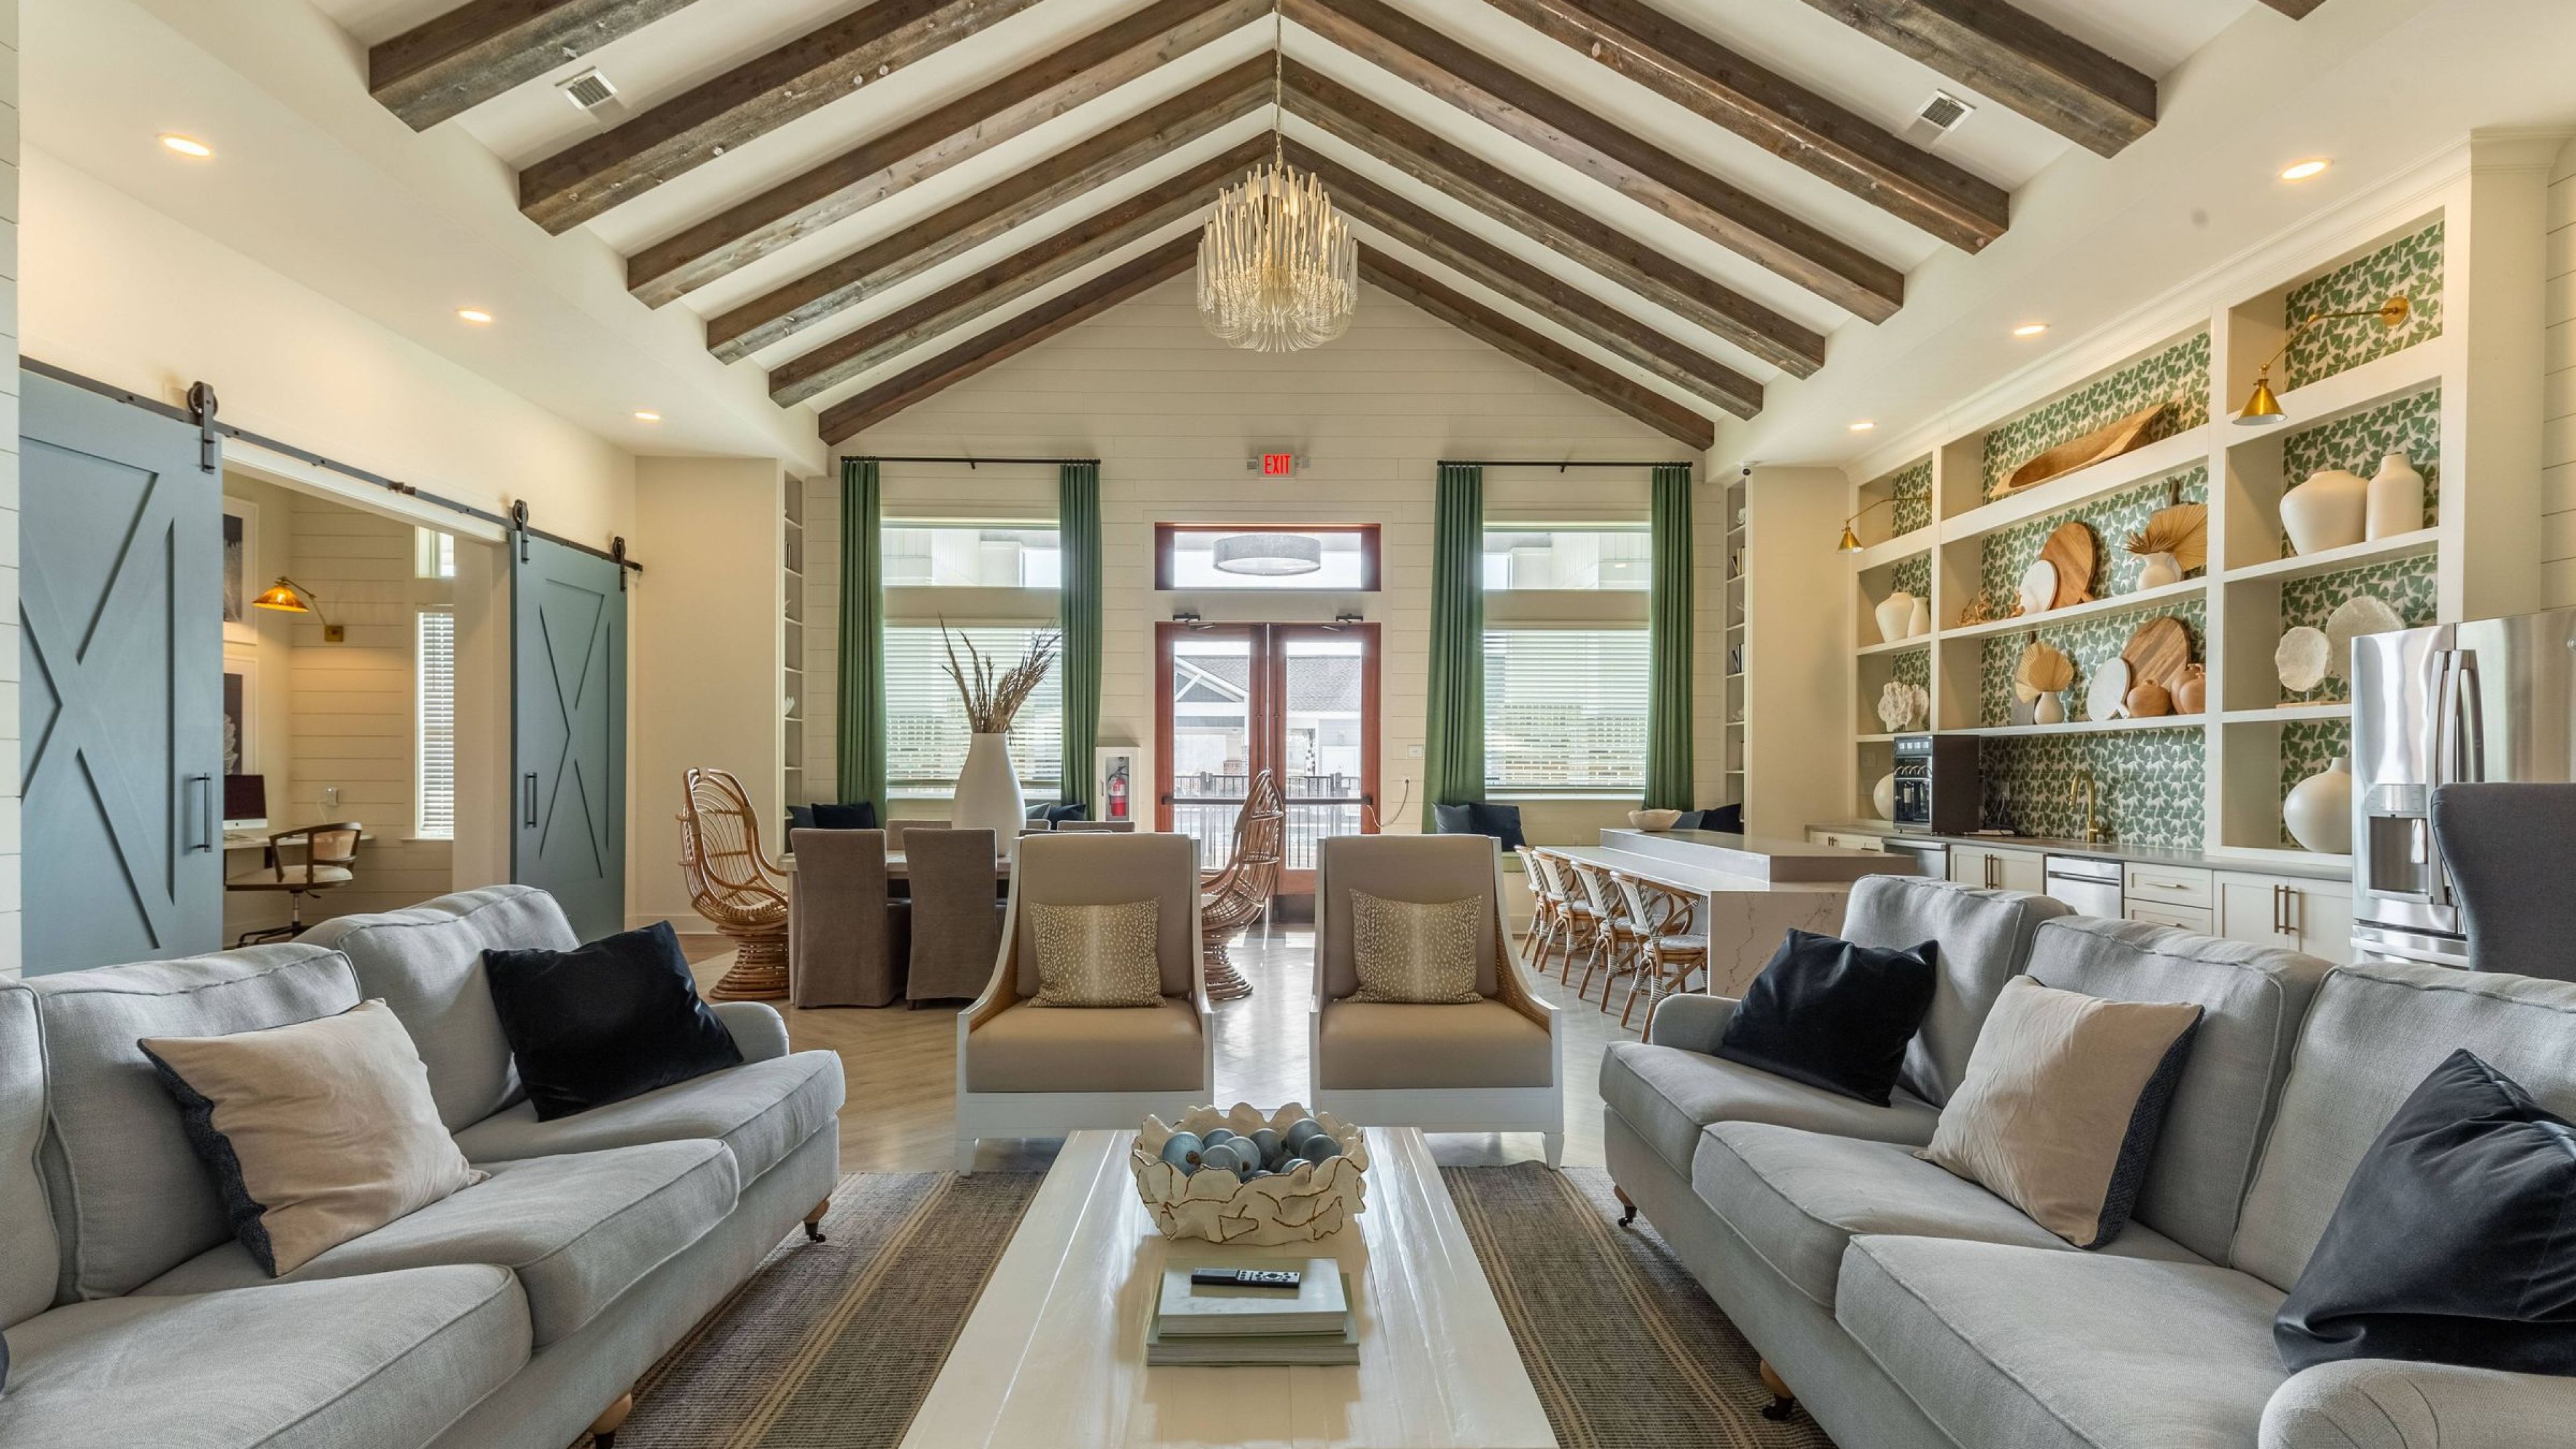 Hawthorne Waterside spacious clubhouse room with high ceilings featuring exposed beams, elegant seating, and stylish decor.